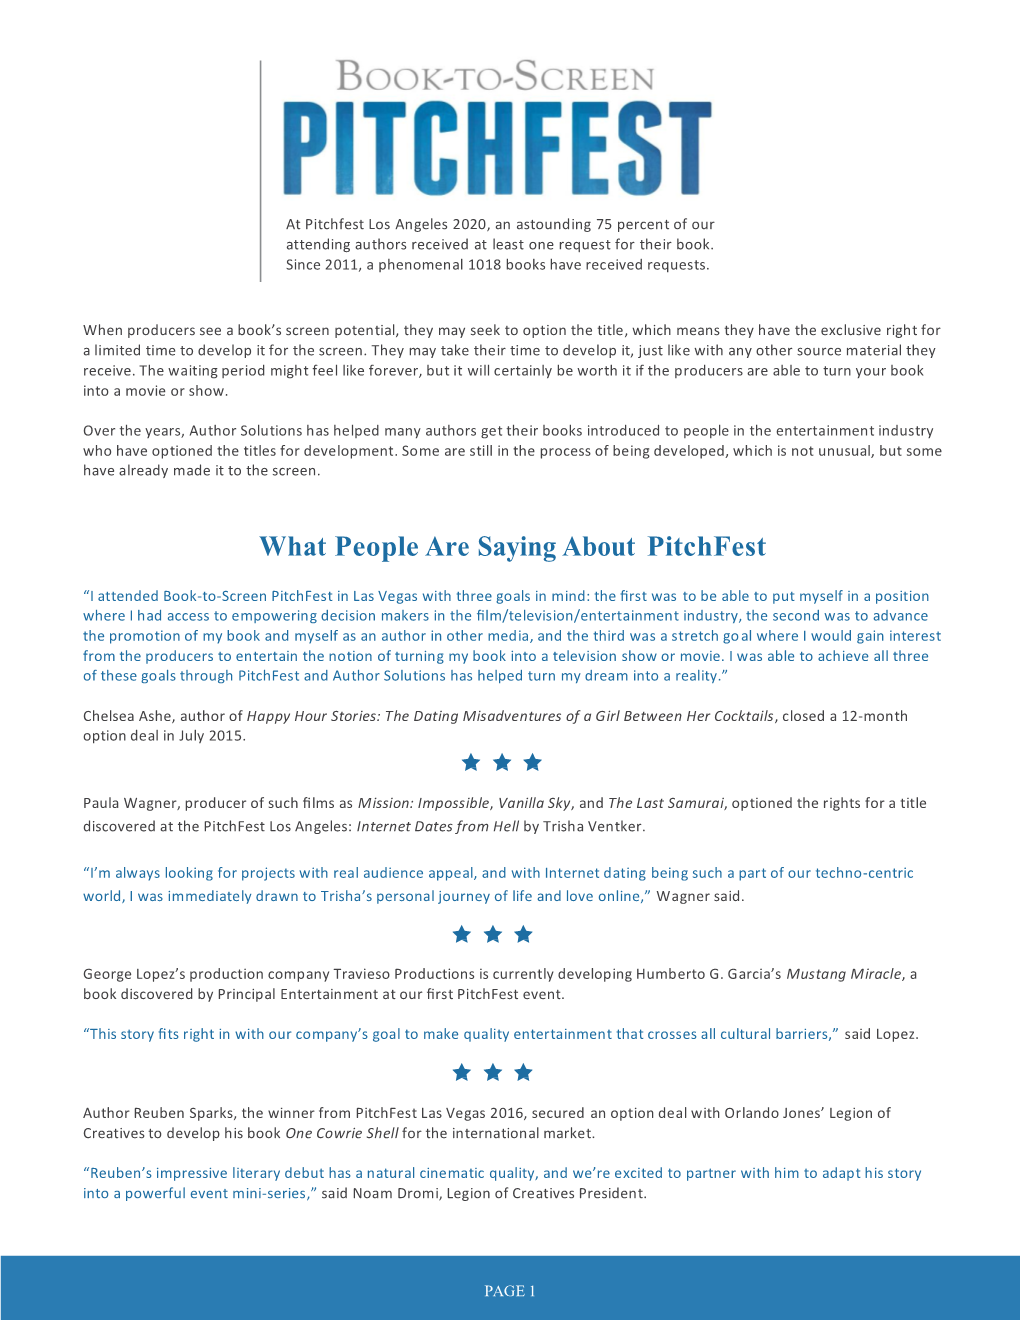 What People Are Saying About Pitchfest